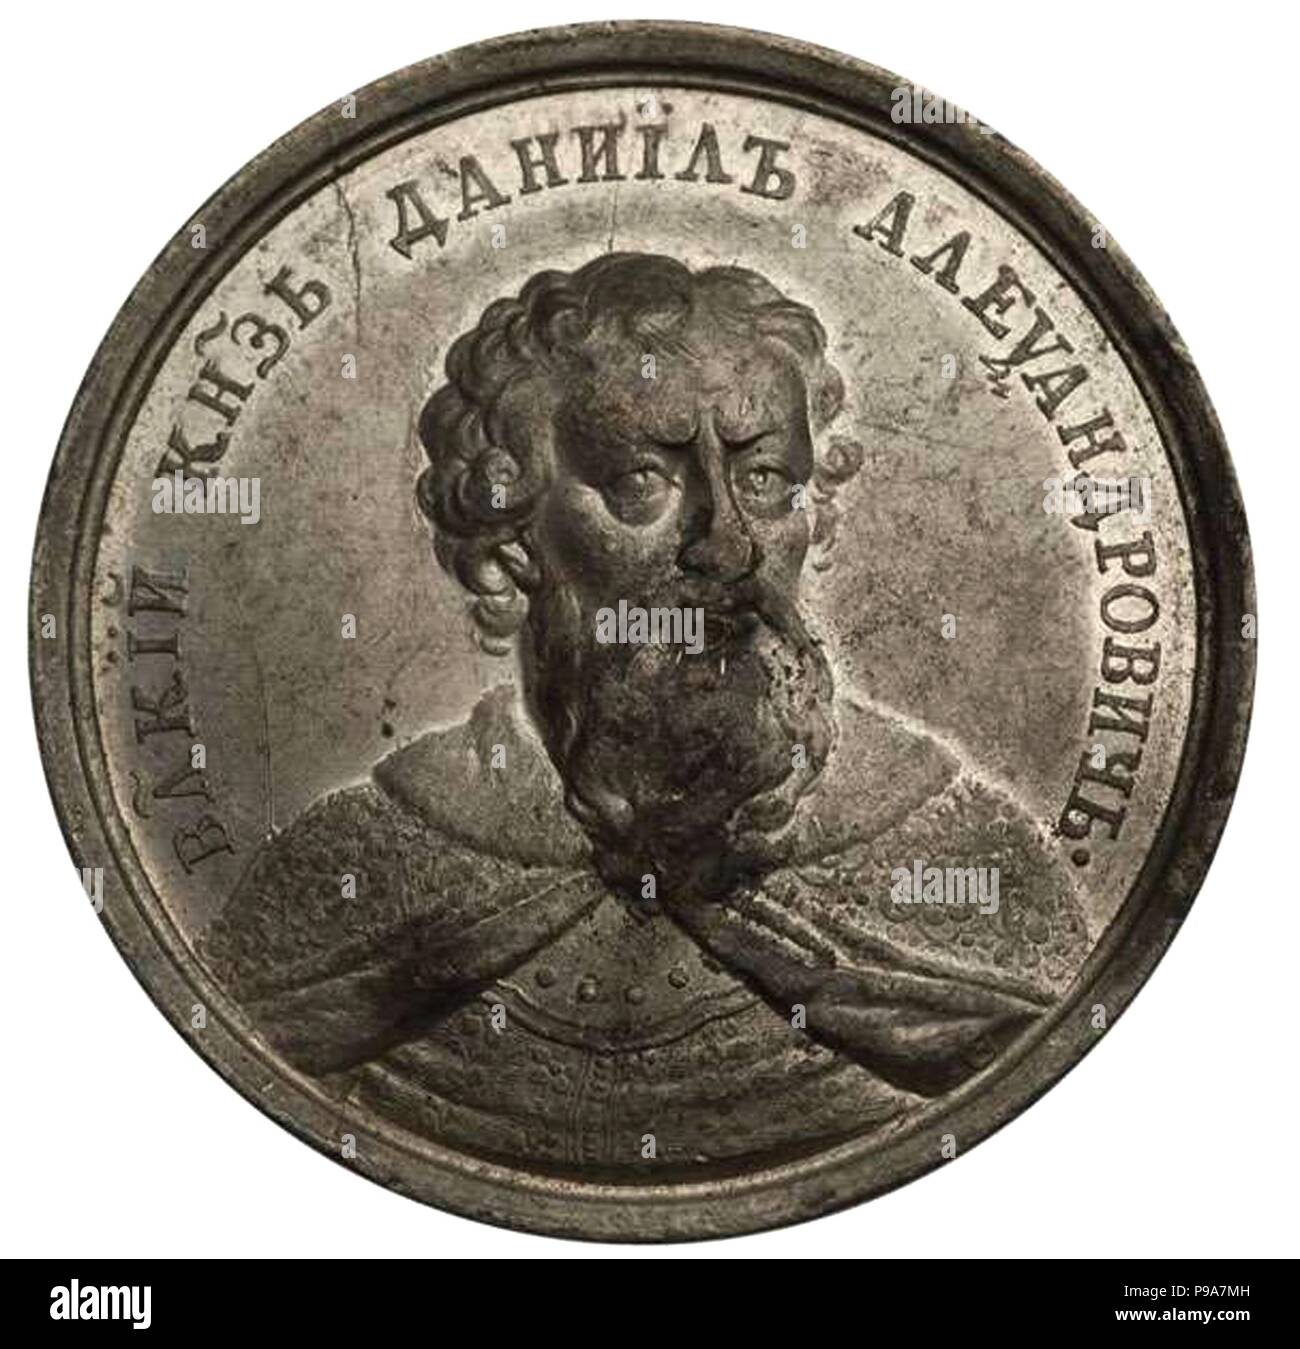 Grand Prince Daniil Aleksandrovich (from the Historical Medal Series). Museum: PRIVATE COLLECTION. Stock Photo